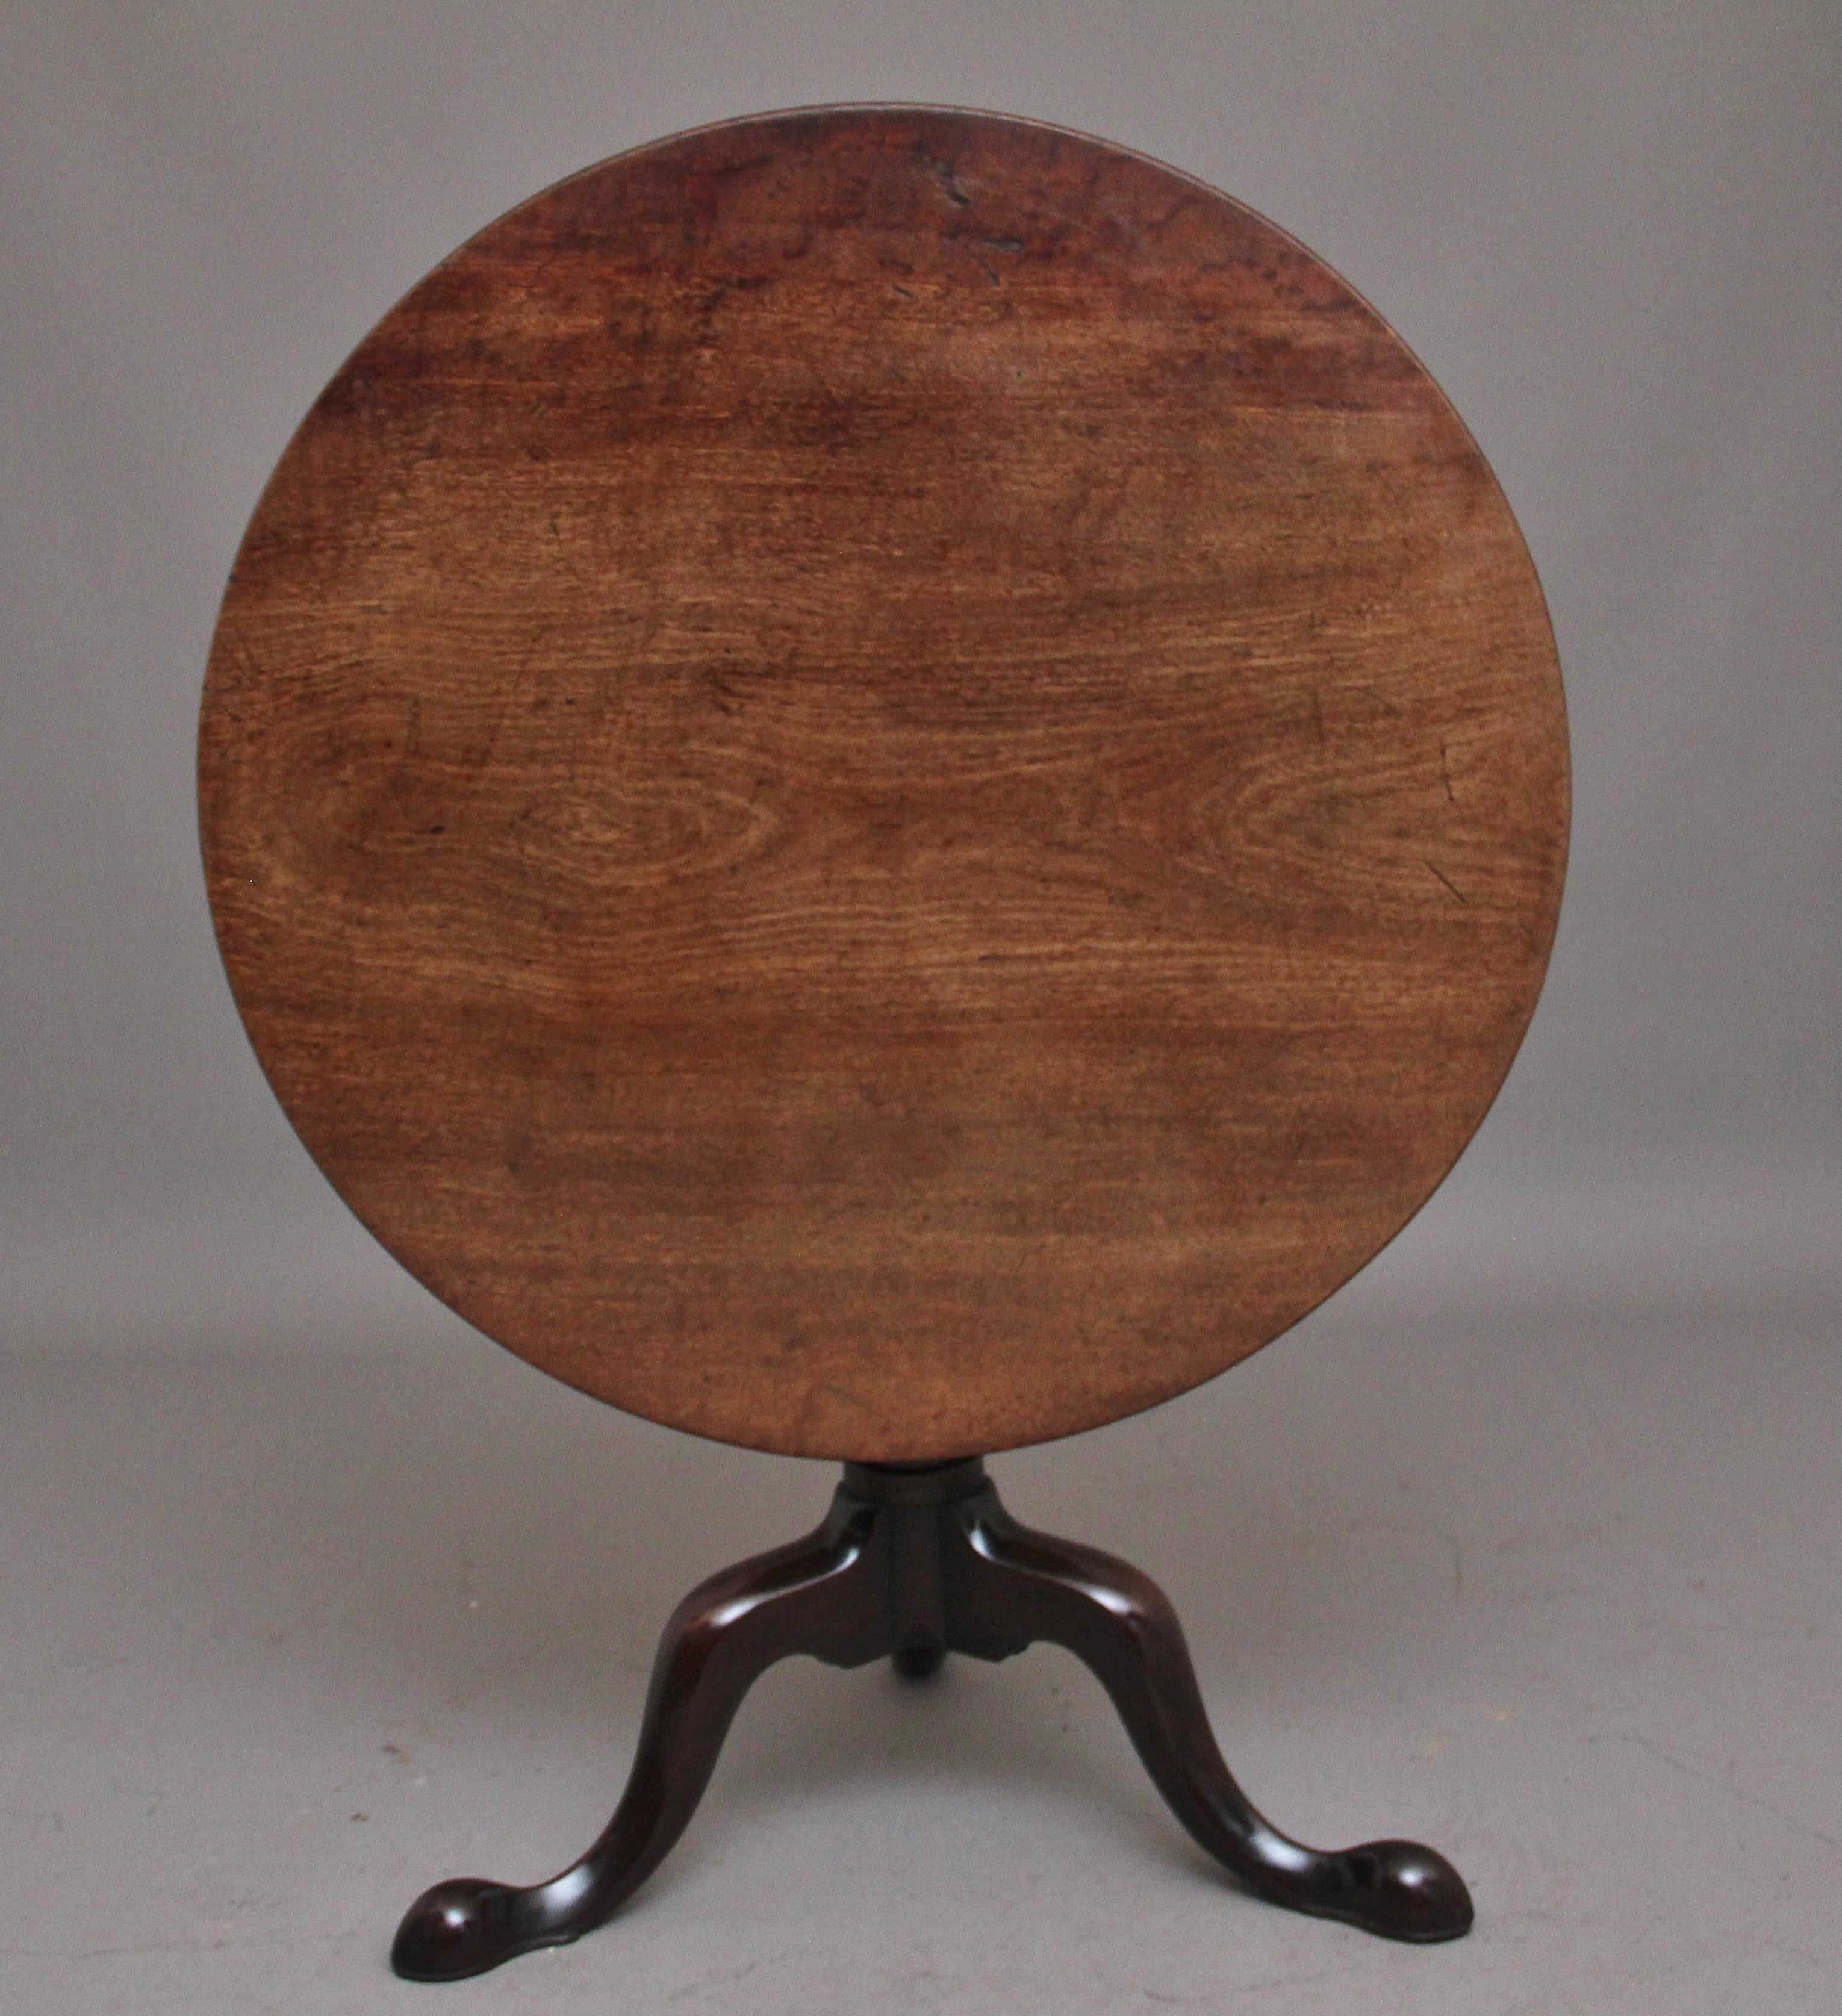 A superb 18th century mahogany tripod table, having a wonderful figured circular top supported on a carved turned column terminating with three slender shaped legs. Lovely color and in excellent condition. Circa 1780.